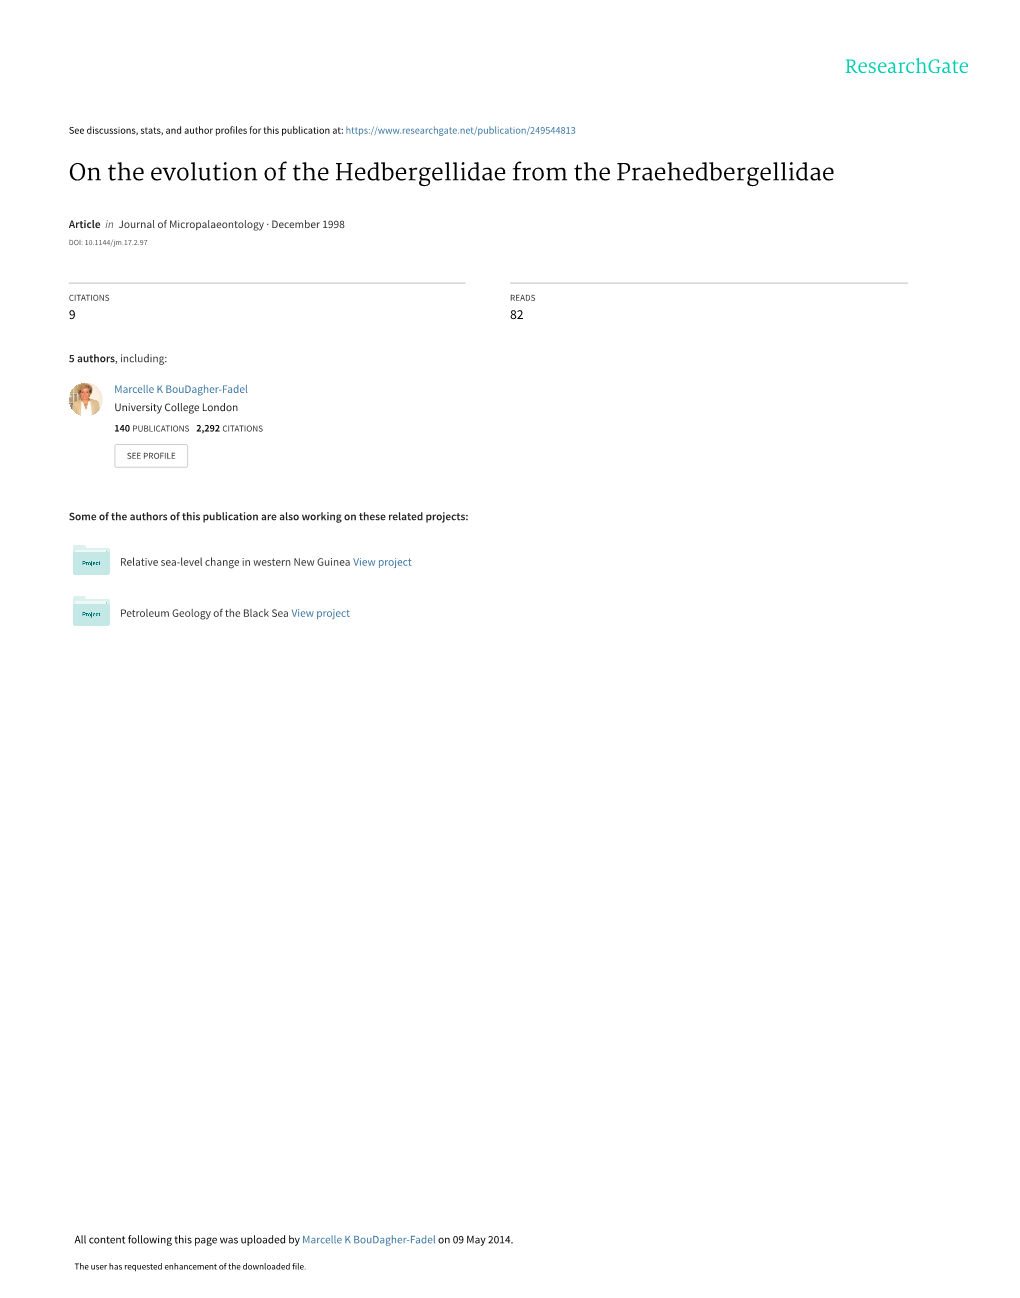 On the Evolution of the Hedbergellidae from the Praehedbergellidae